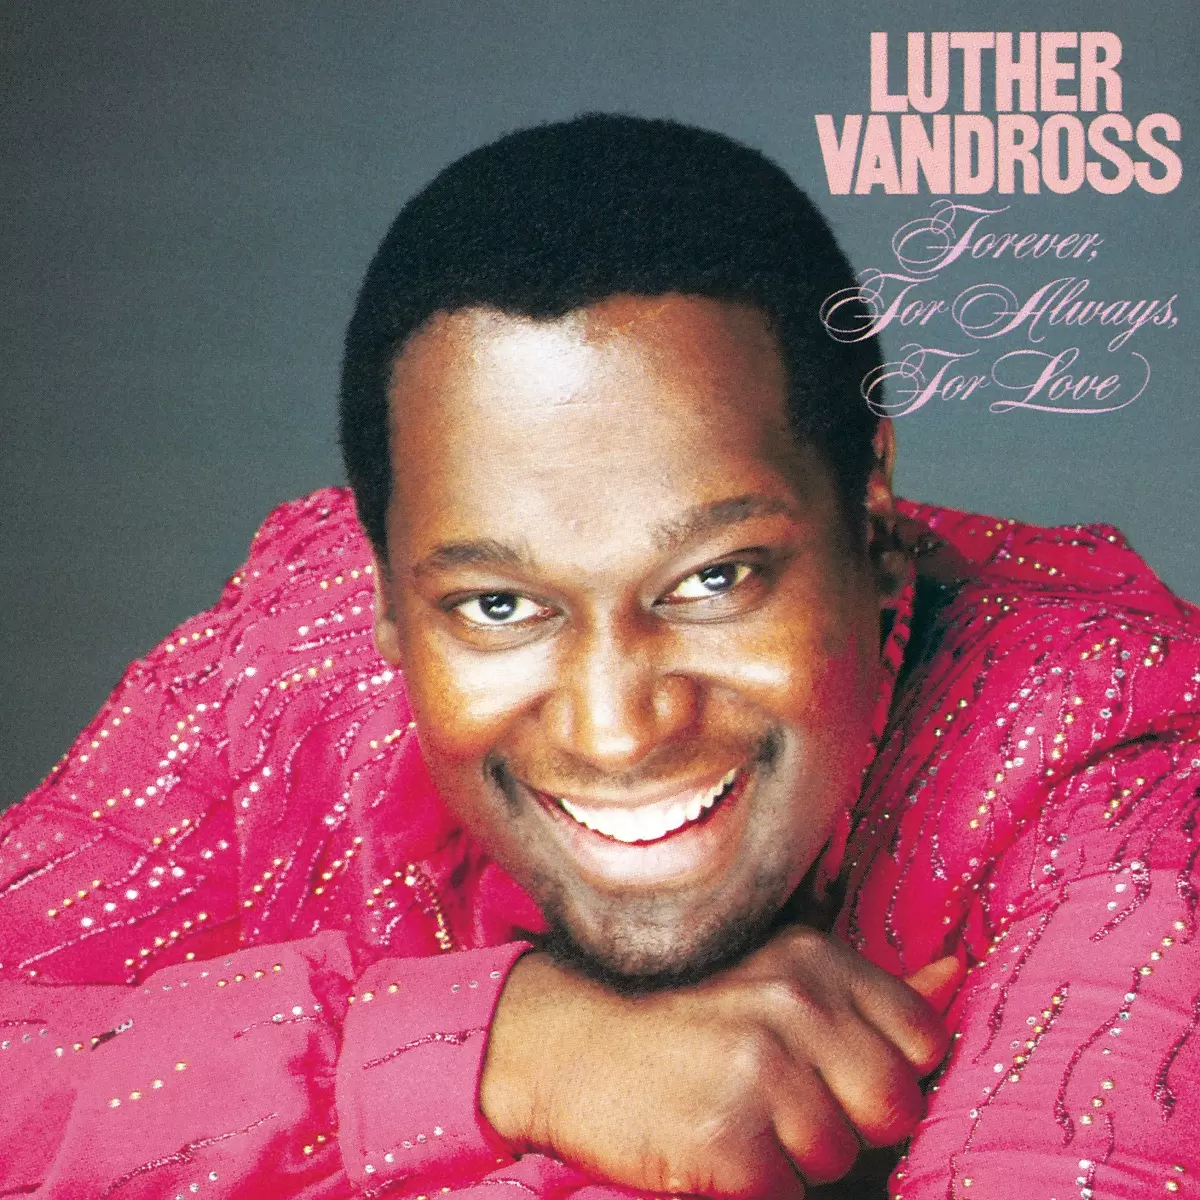 Forever, For Always, For Love by Luther Vandross on Apple Music